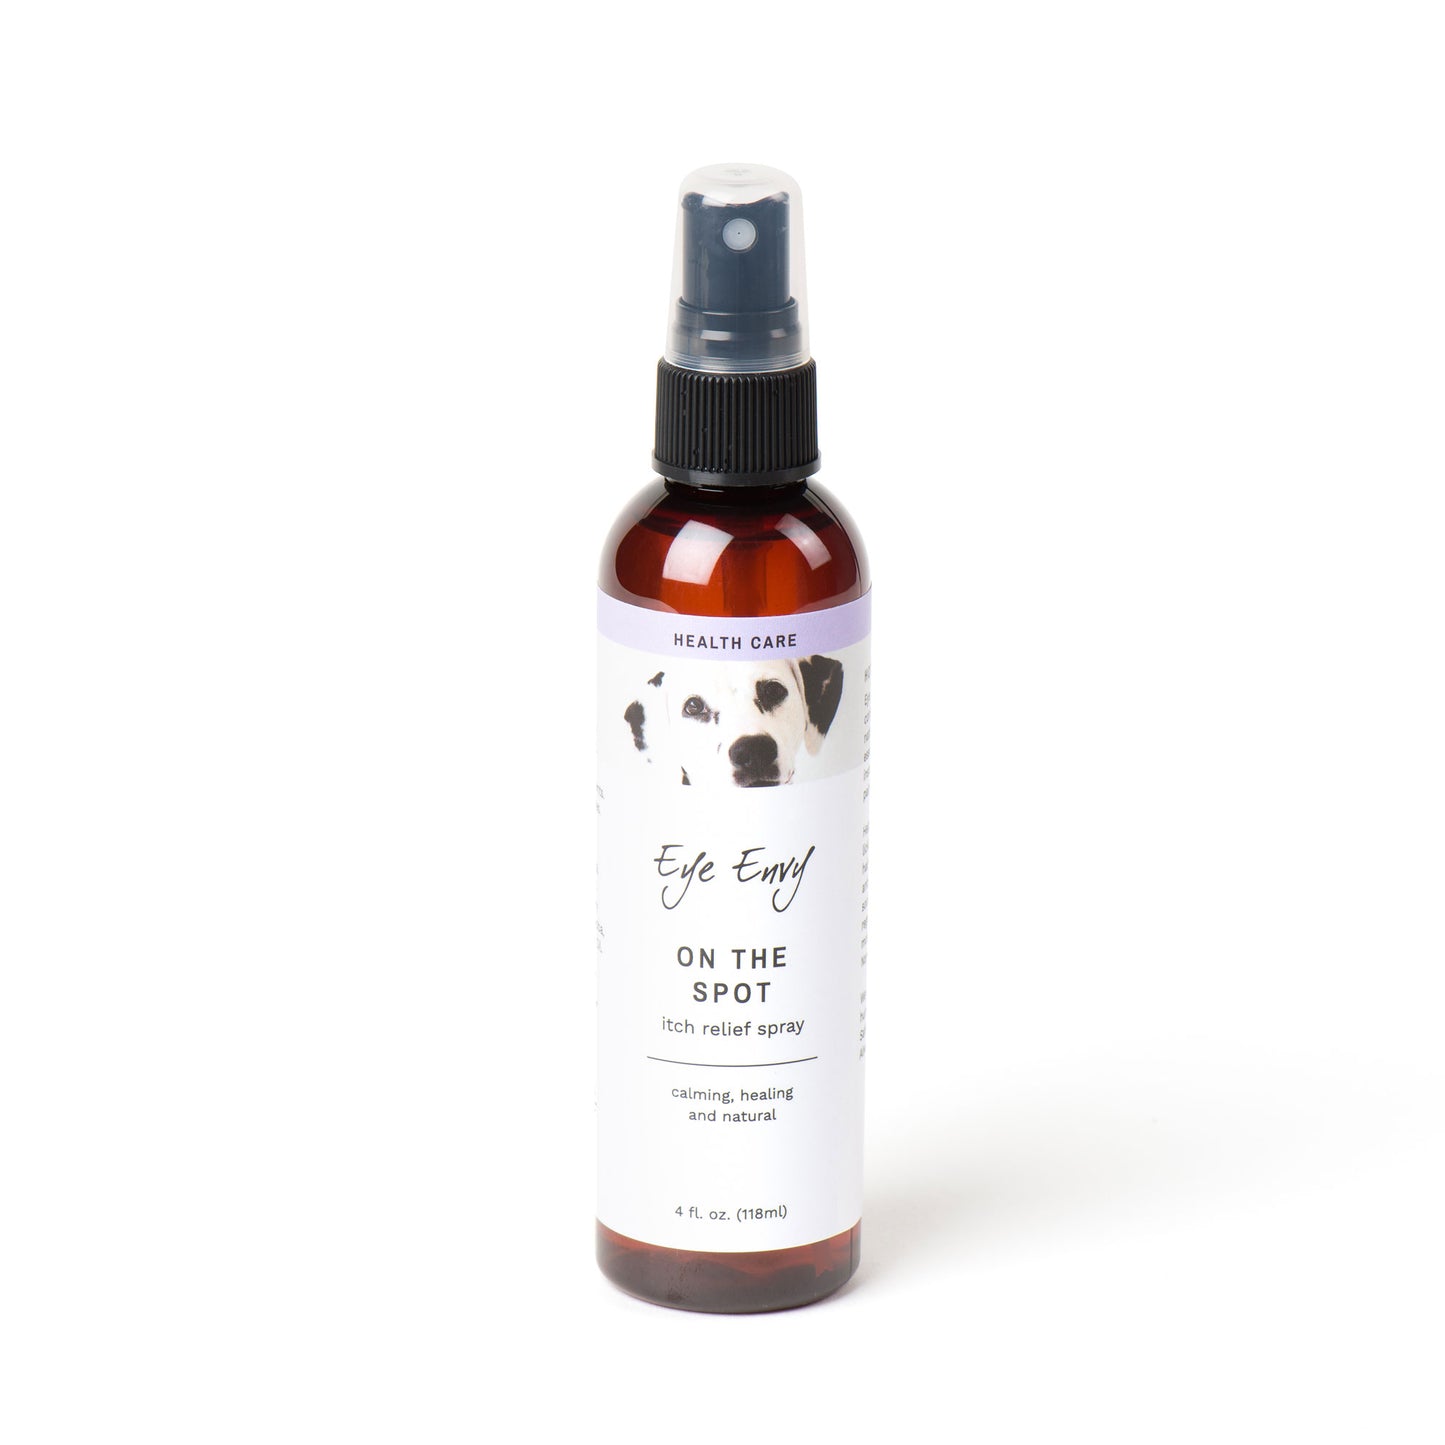 On the Spot Healing & Itch Relief Spray